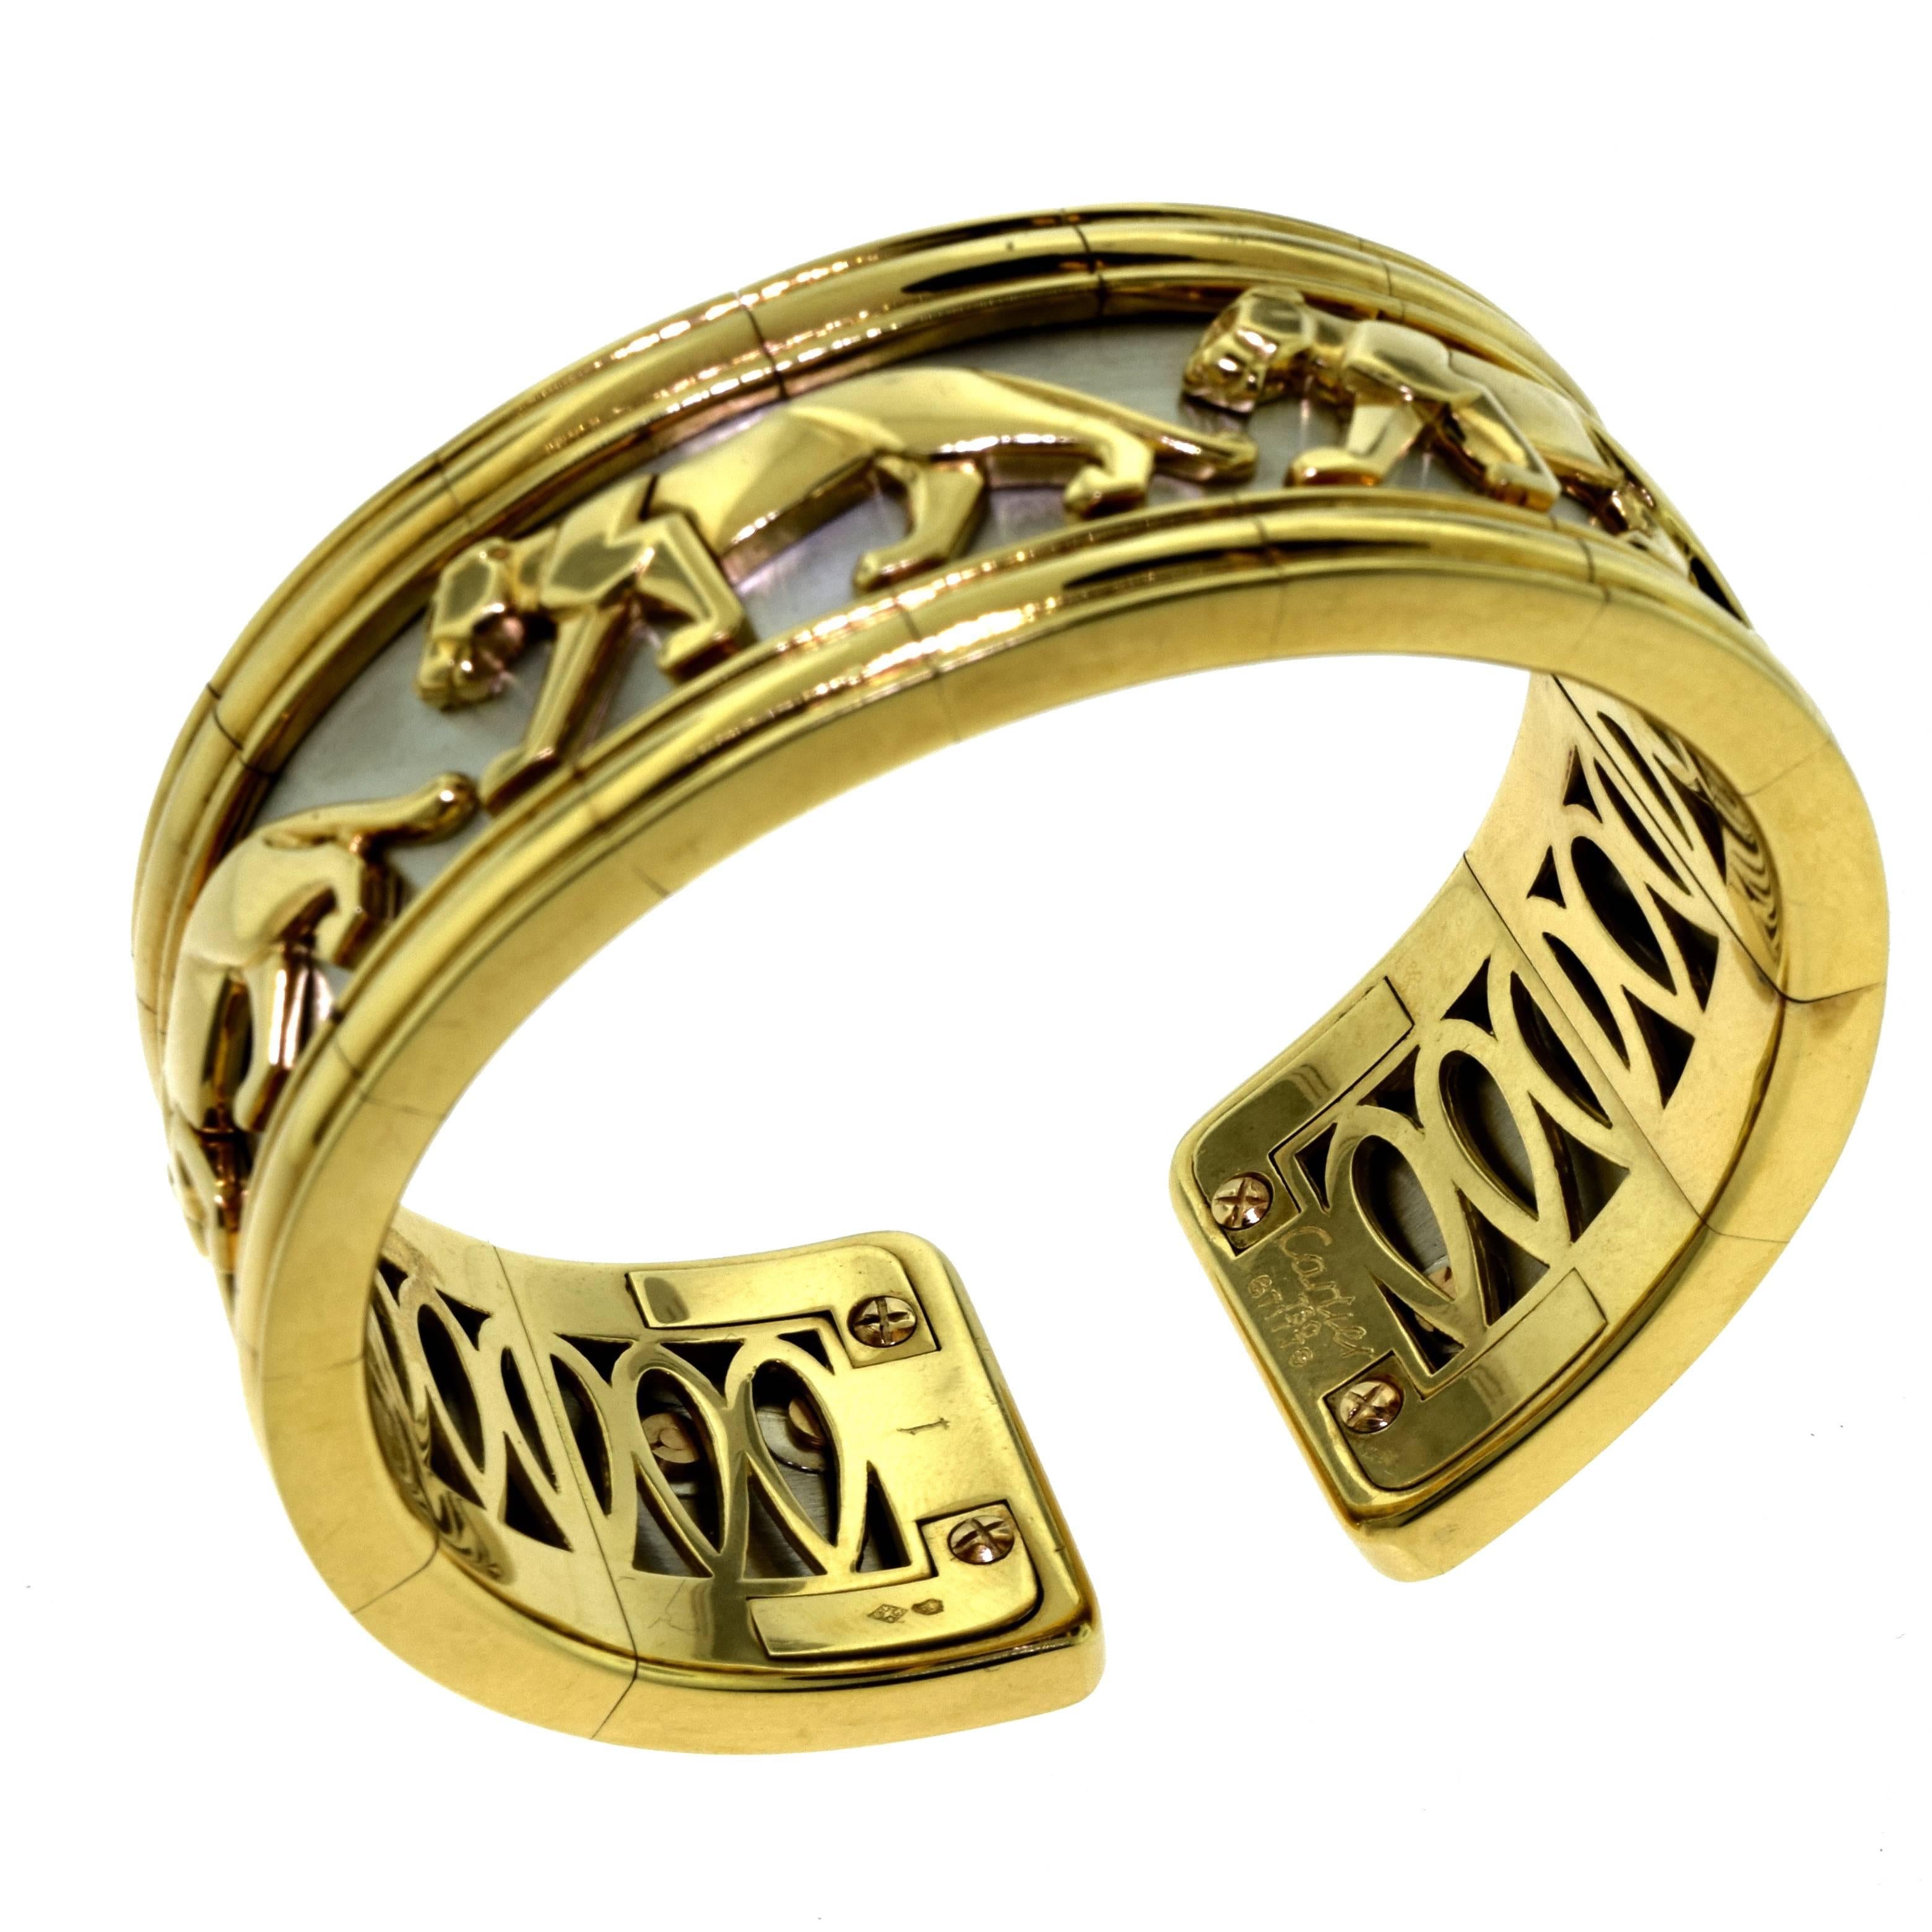 Designer: Cartier
Collection: Pharaon
Metal: 18 Karat Yellow Gold , 18 Karat White Gold
Bracelet Size: Flexible. (Fits Small to Large wrist)
Cuff Width: 0.935 inches (23.72 mm)
Total Item Weight (g): 109.8
Hallmark: 1 Cartier Serial No.
** we also